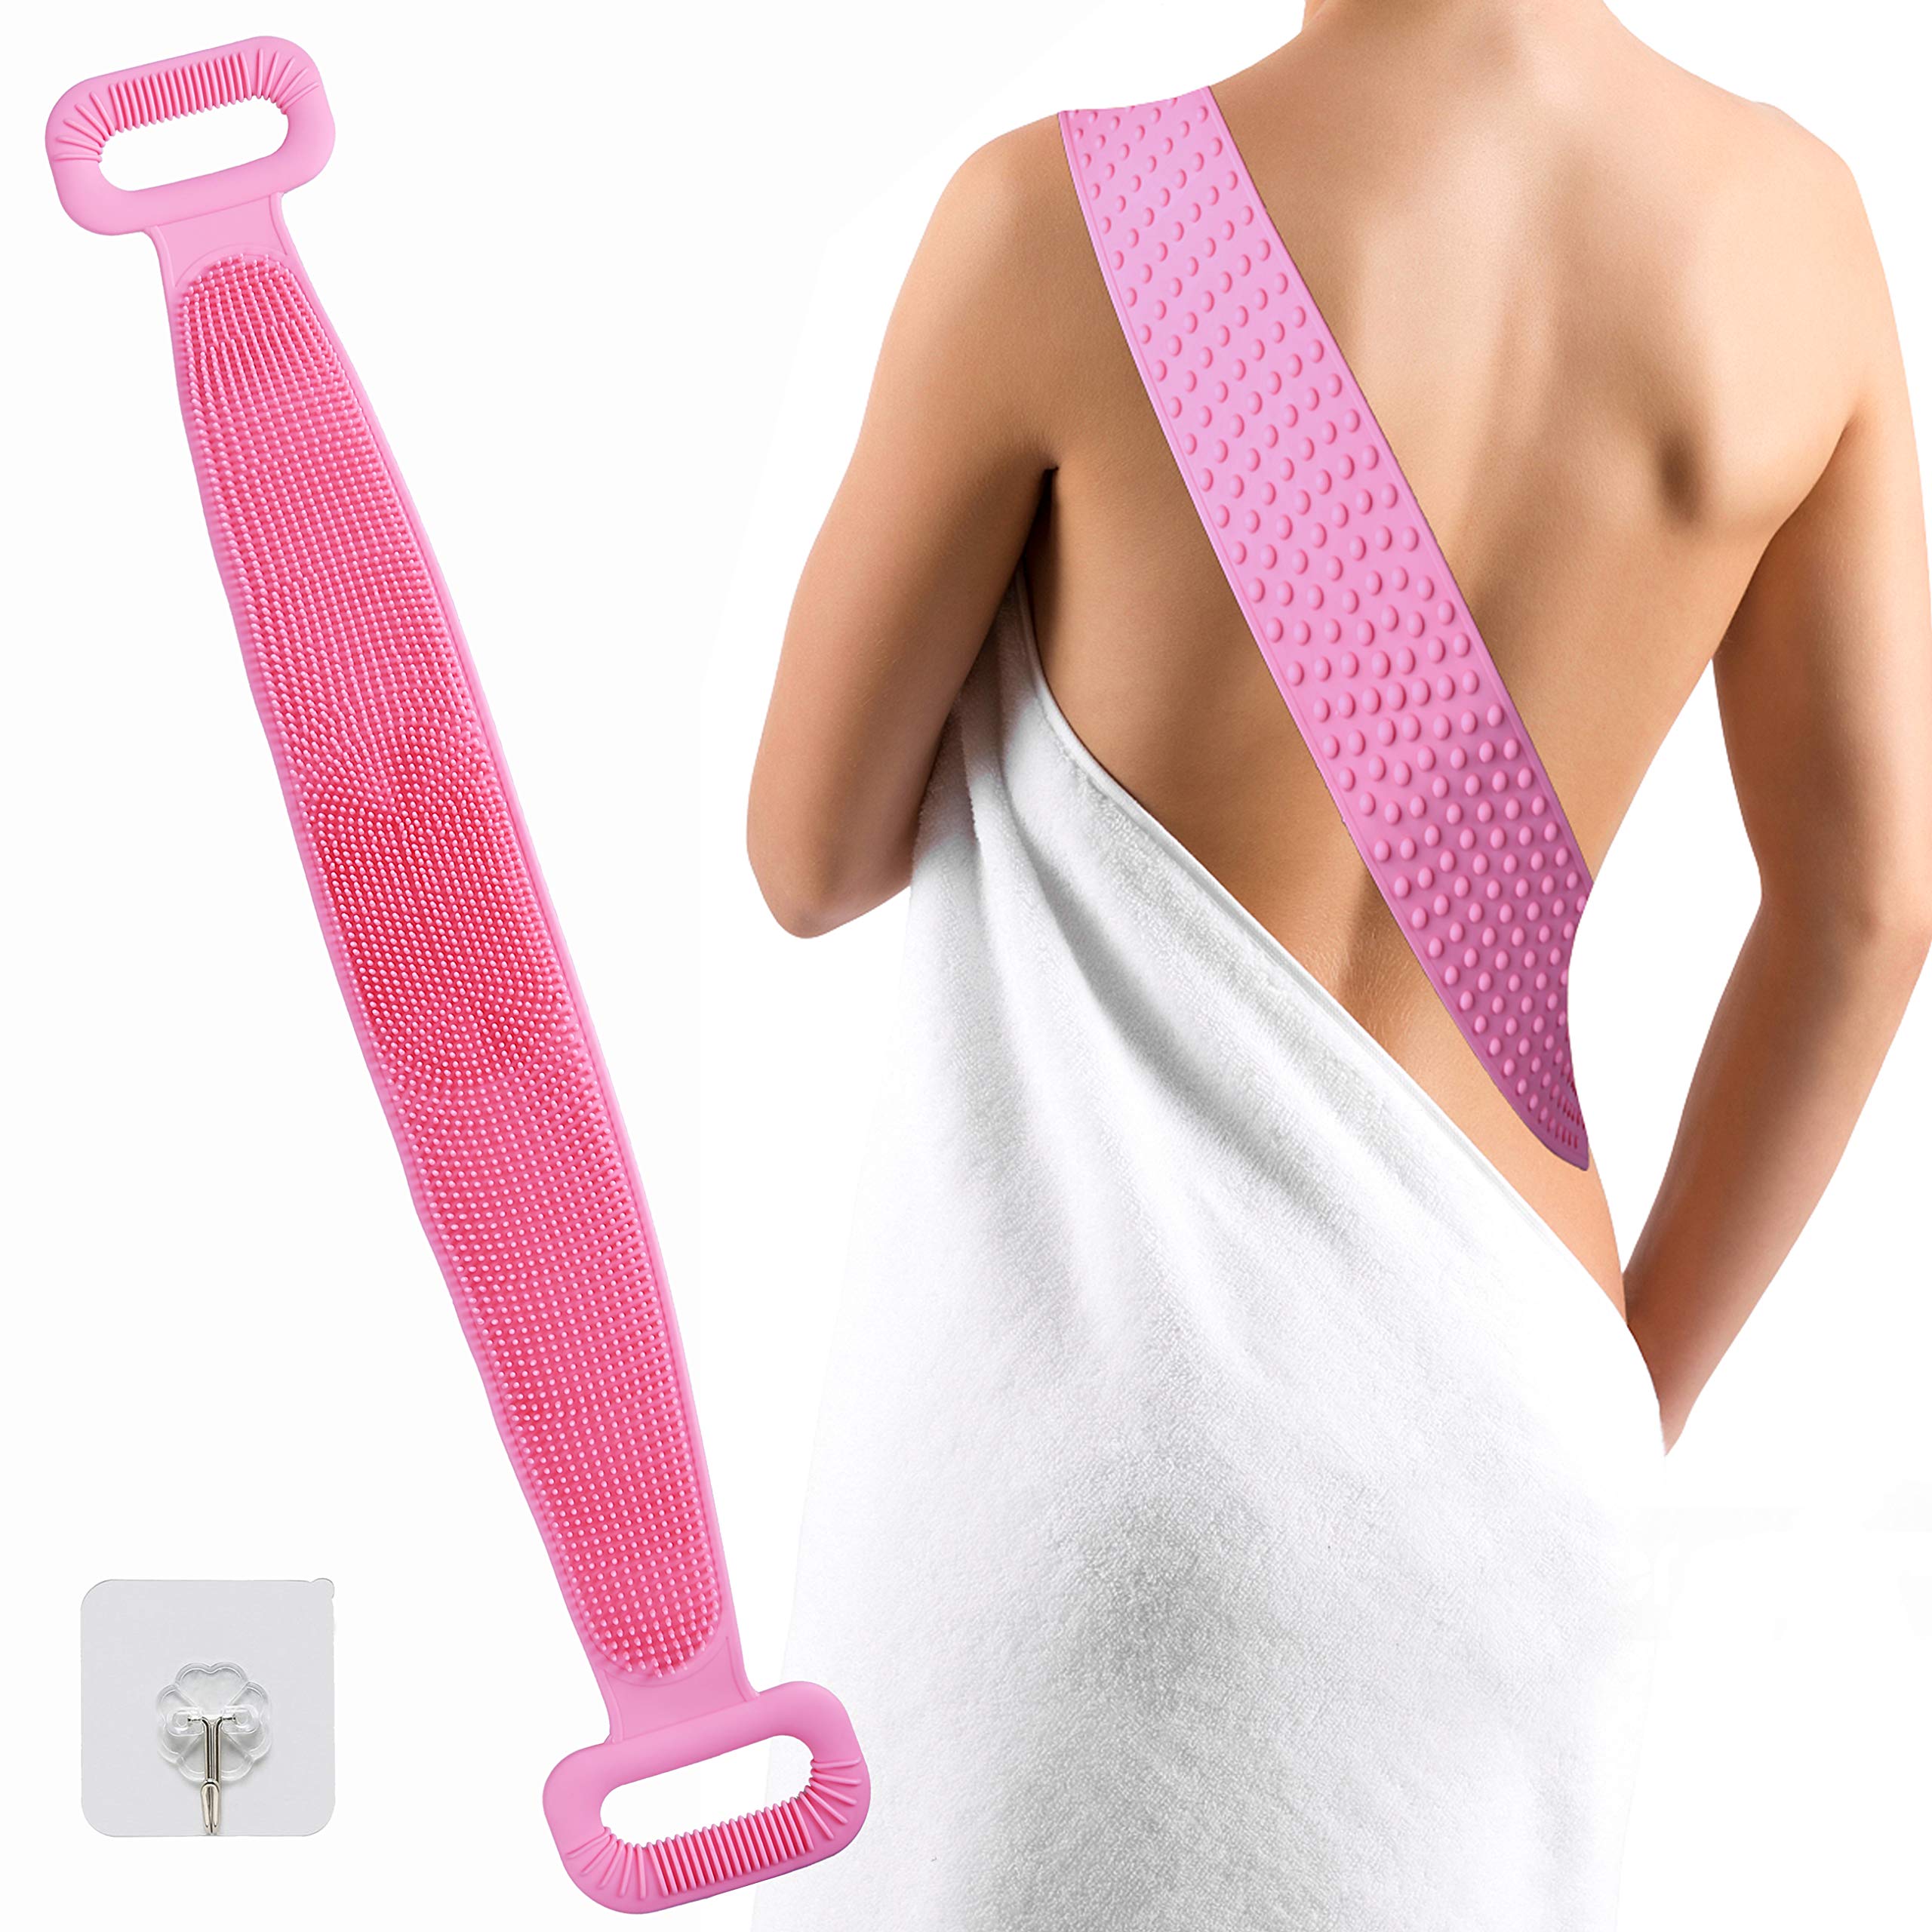 Back Scrubber, Silicone Back Scrubber for Shower, Body Scrubber, Silicone Body Scrubber, Exfoliating Body Scrubber, Exfoliating Long Silicone Body Back Scrubber (Pink)